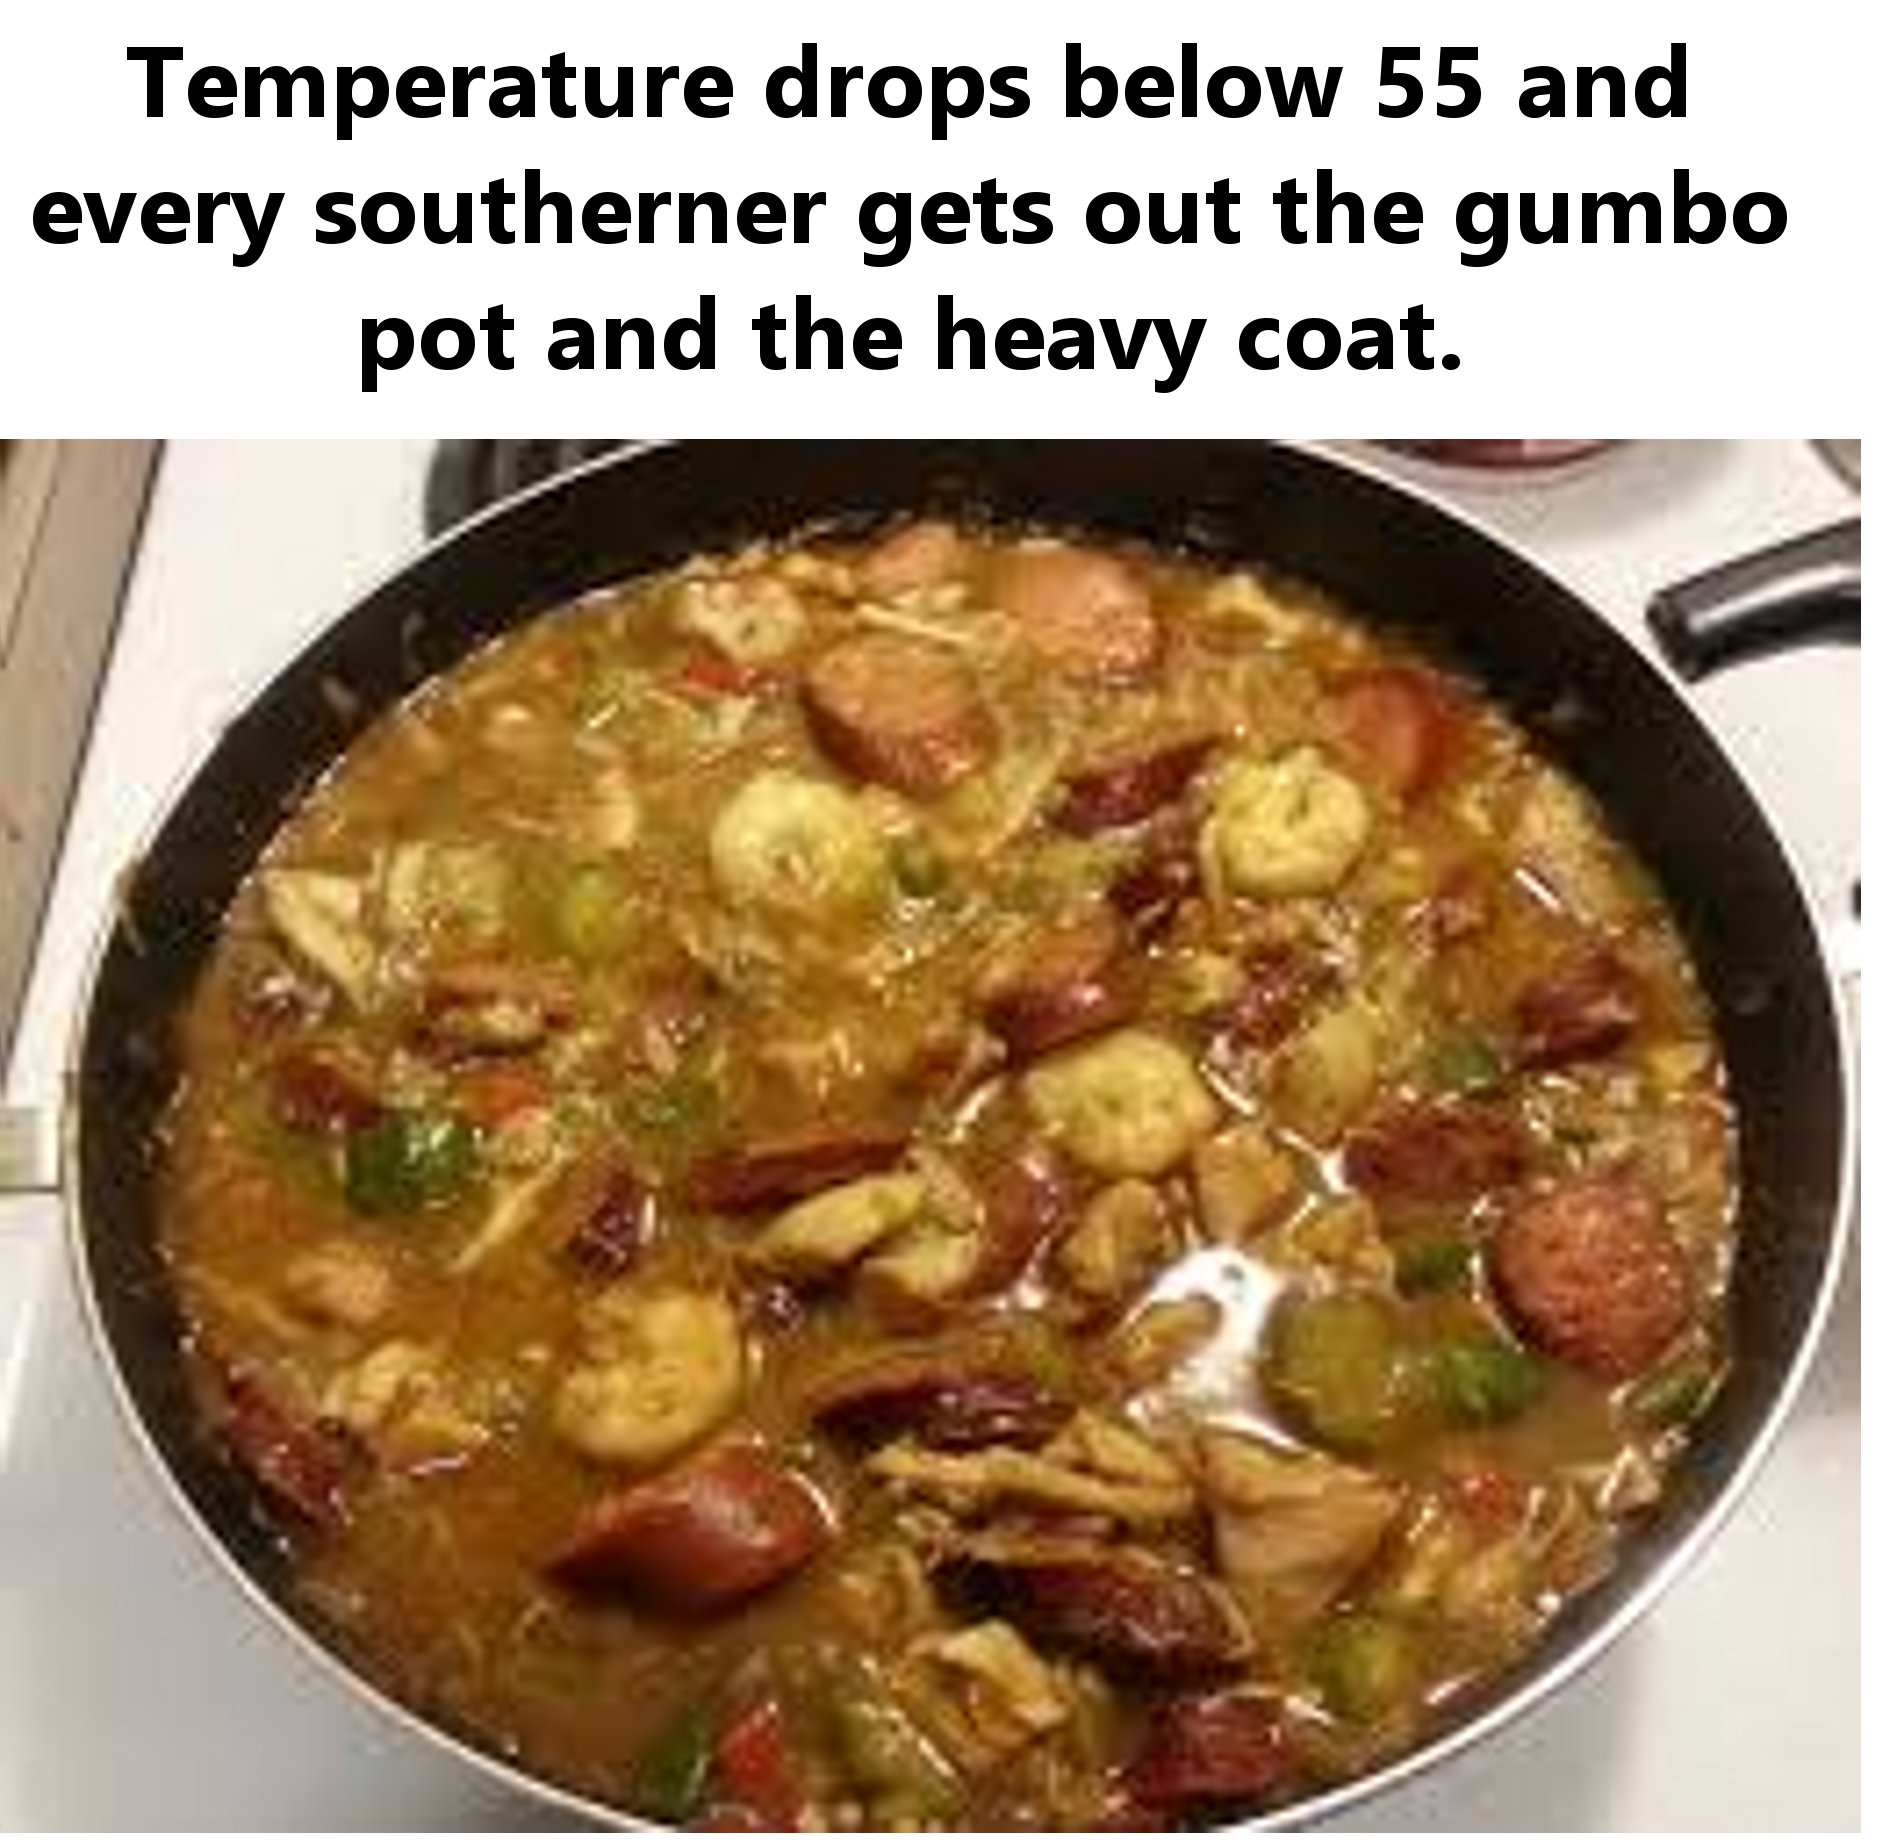 Gumbo - Temperature drops below 55 and every southerner gets out the gumbo pot and the heavy coat.